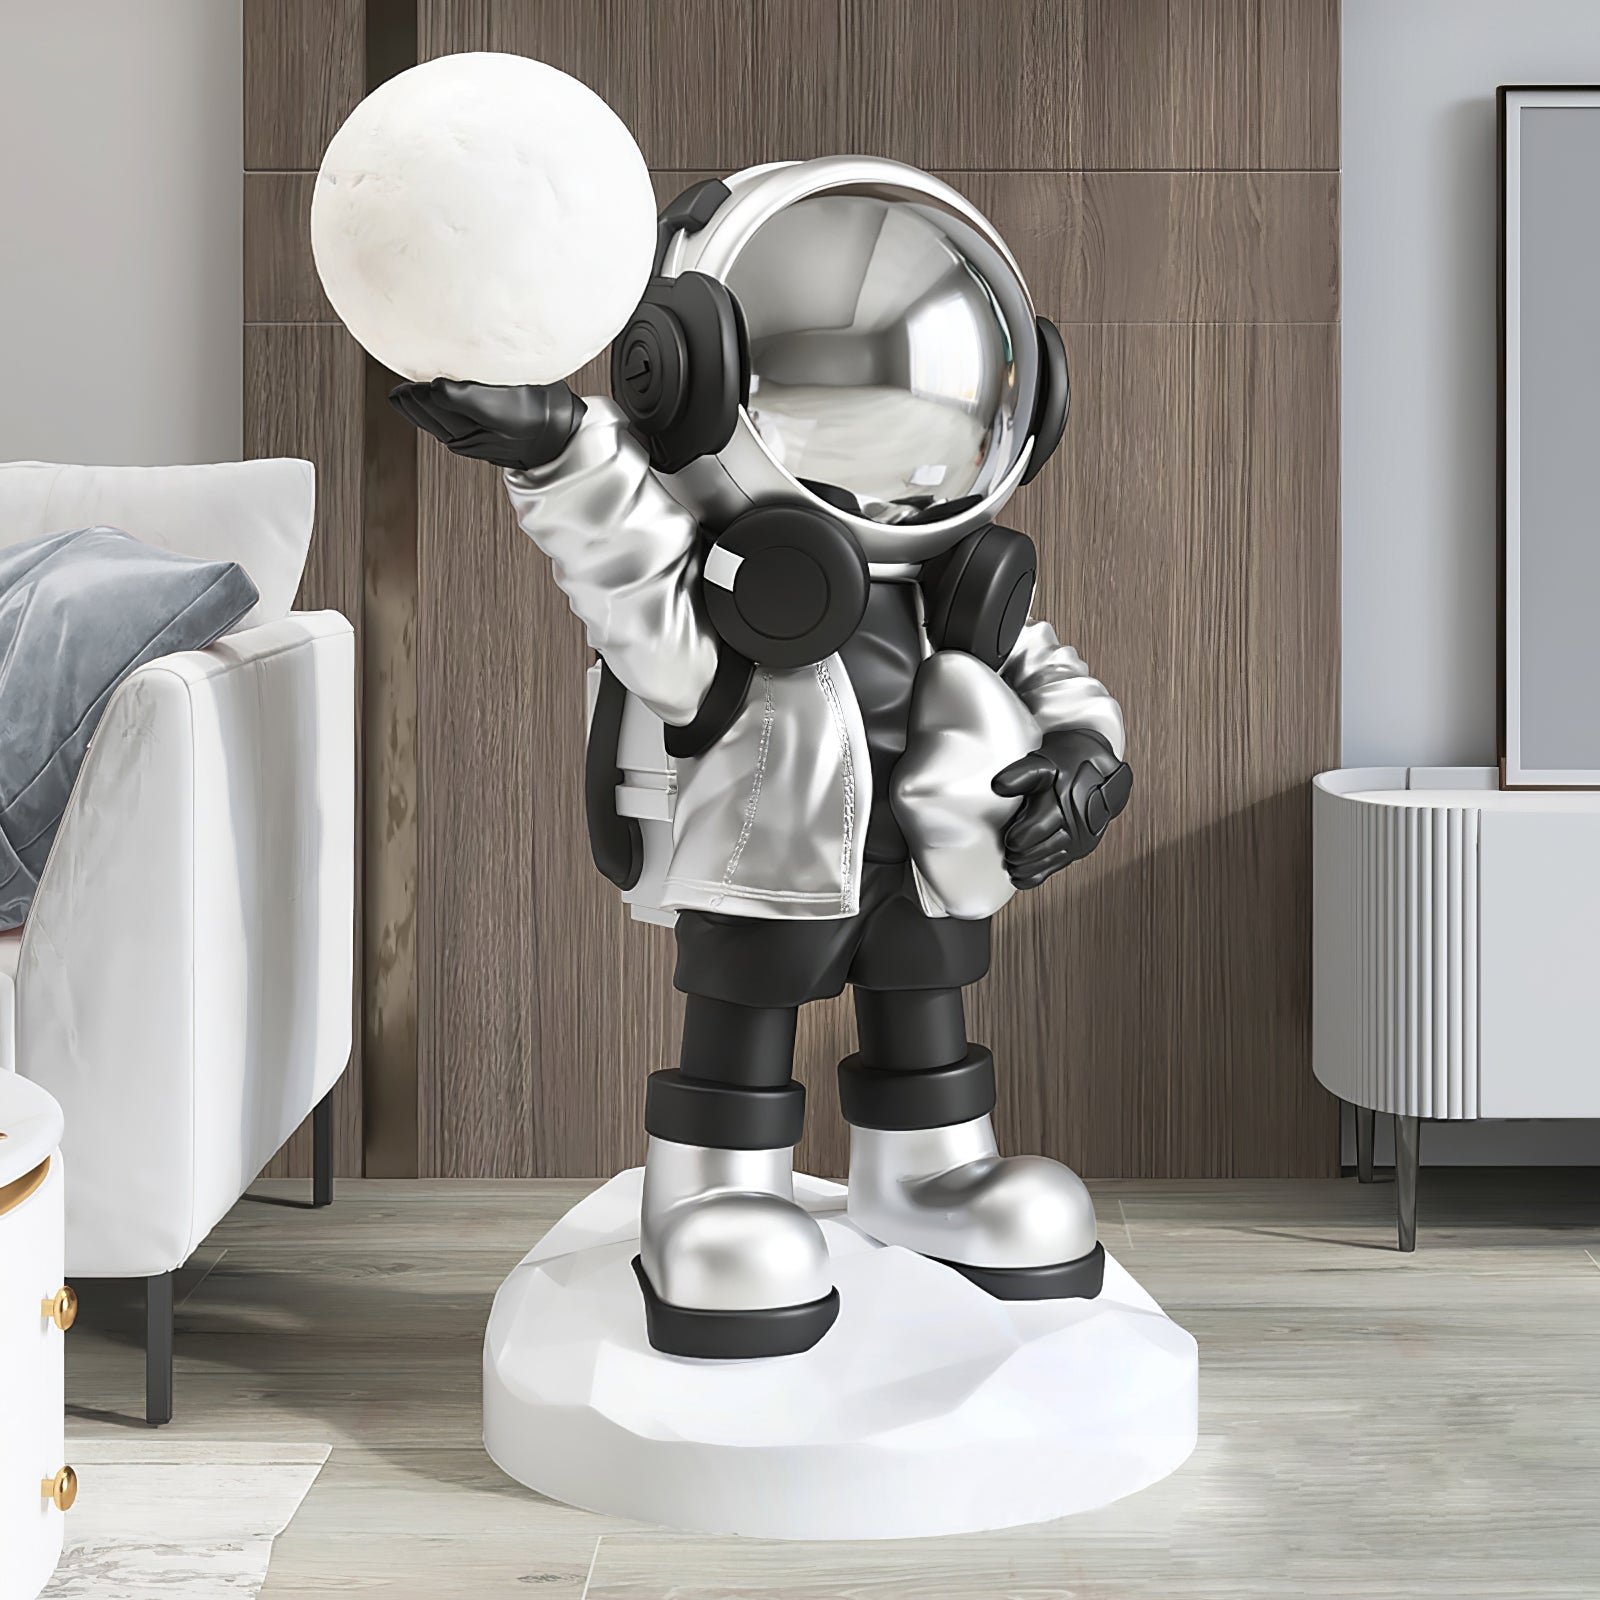 Apollo Astronaut Floor Lamp with a diameter of 19.6 inches and a height of 29.5 inches, or 50cm x 75cm, featuring a chrome finish and an EU plug.